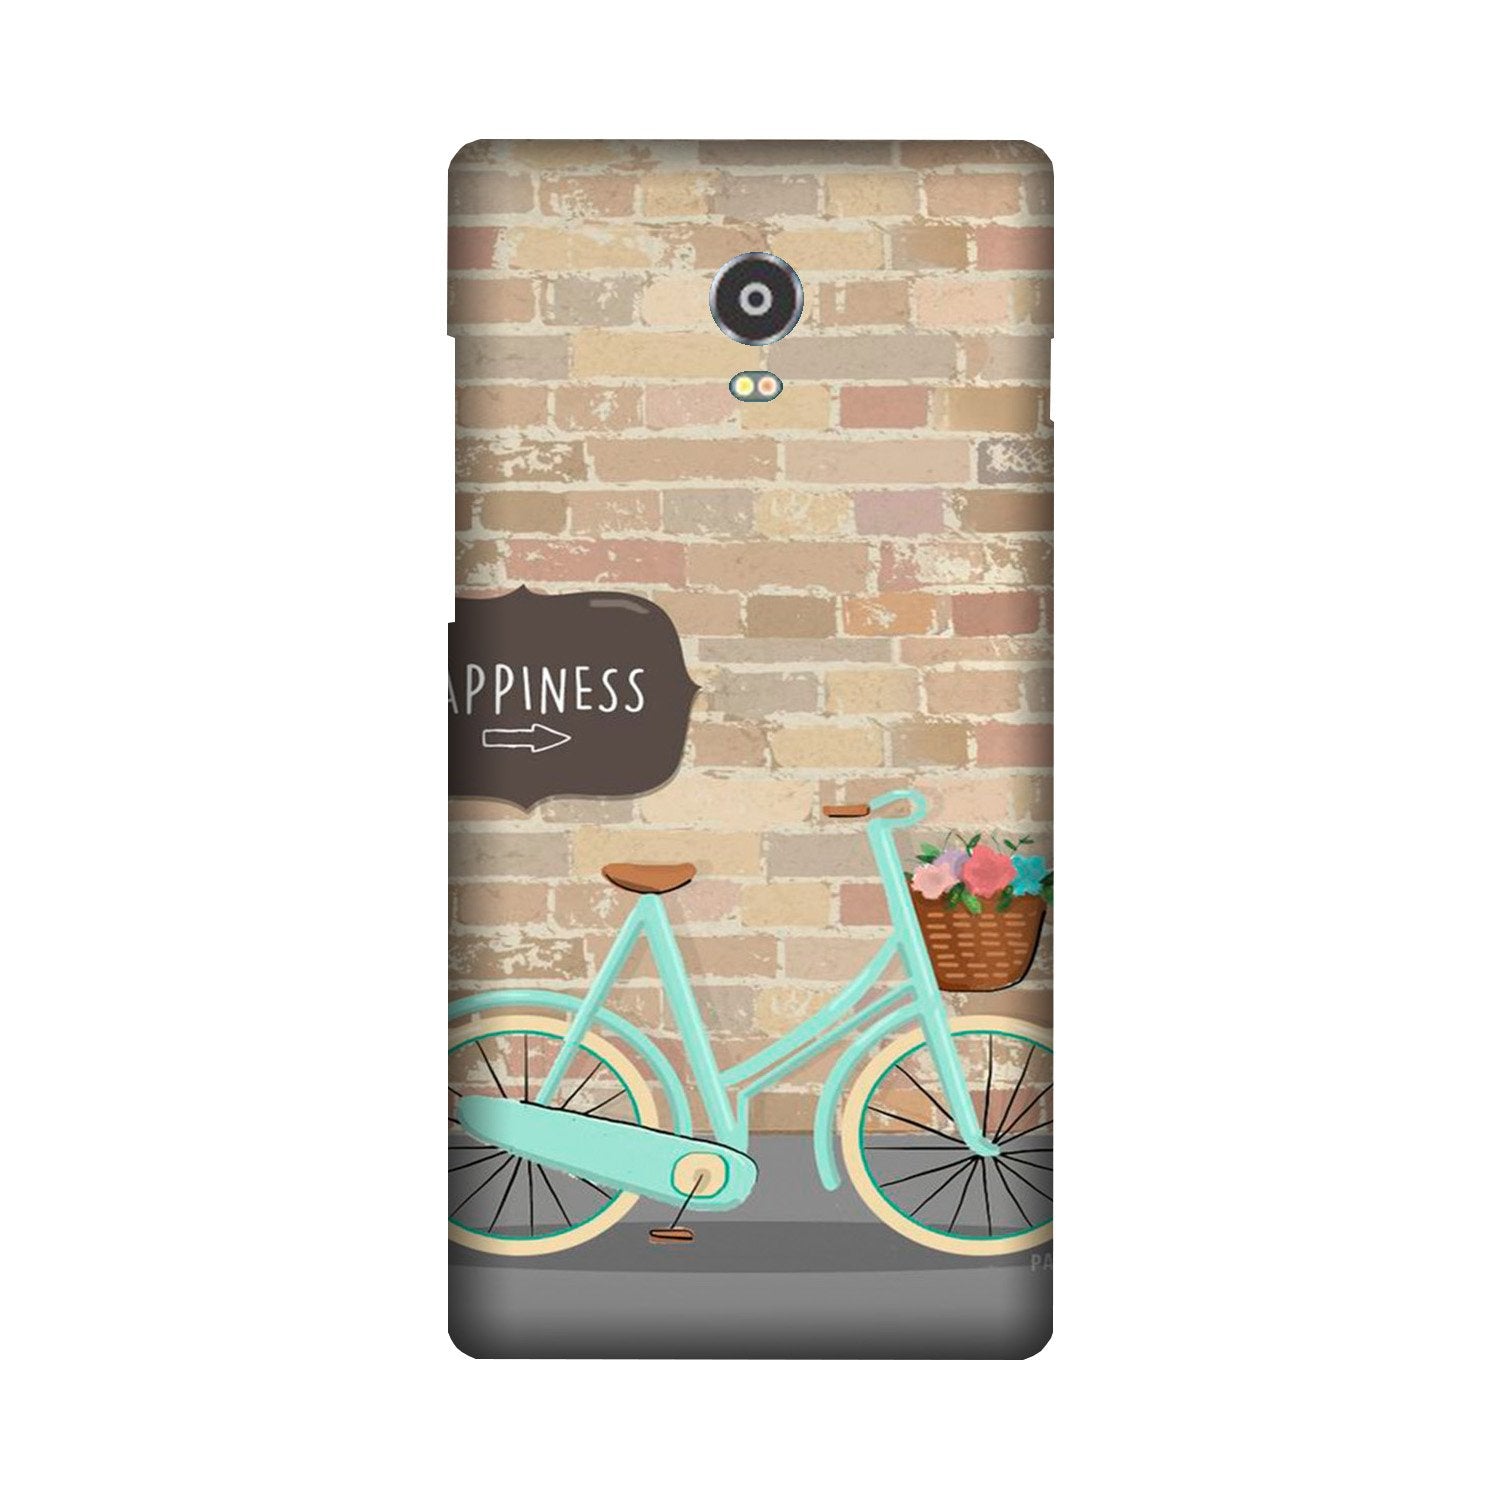 Happiness Case for Lenovo Vibe P1